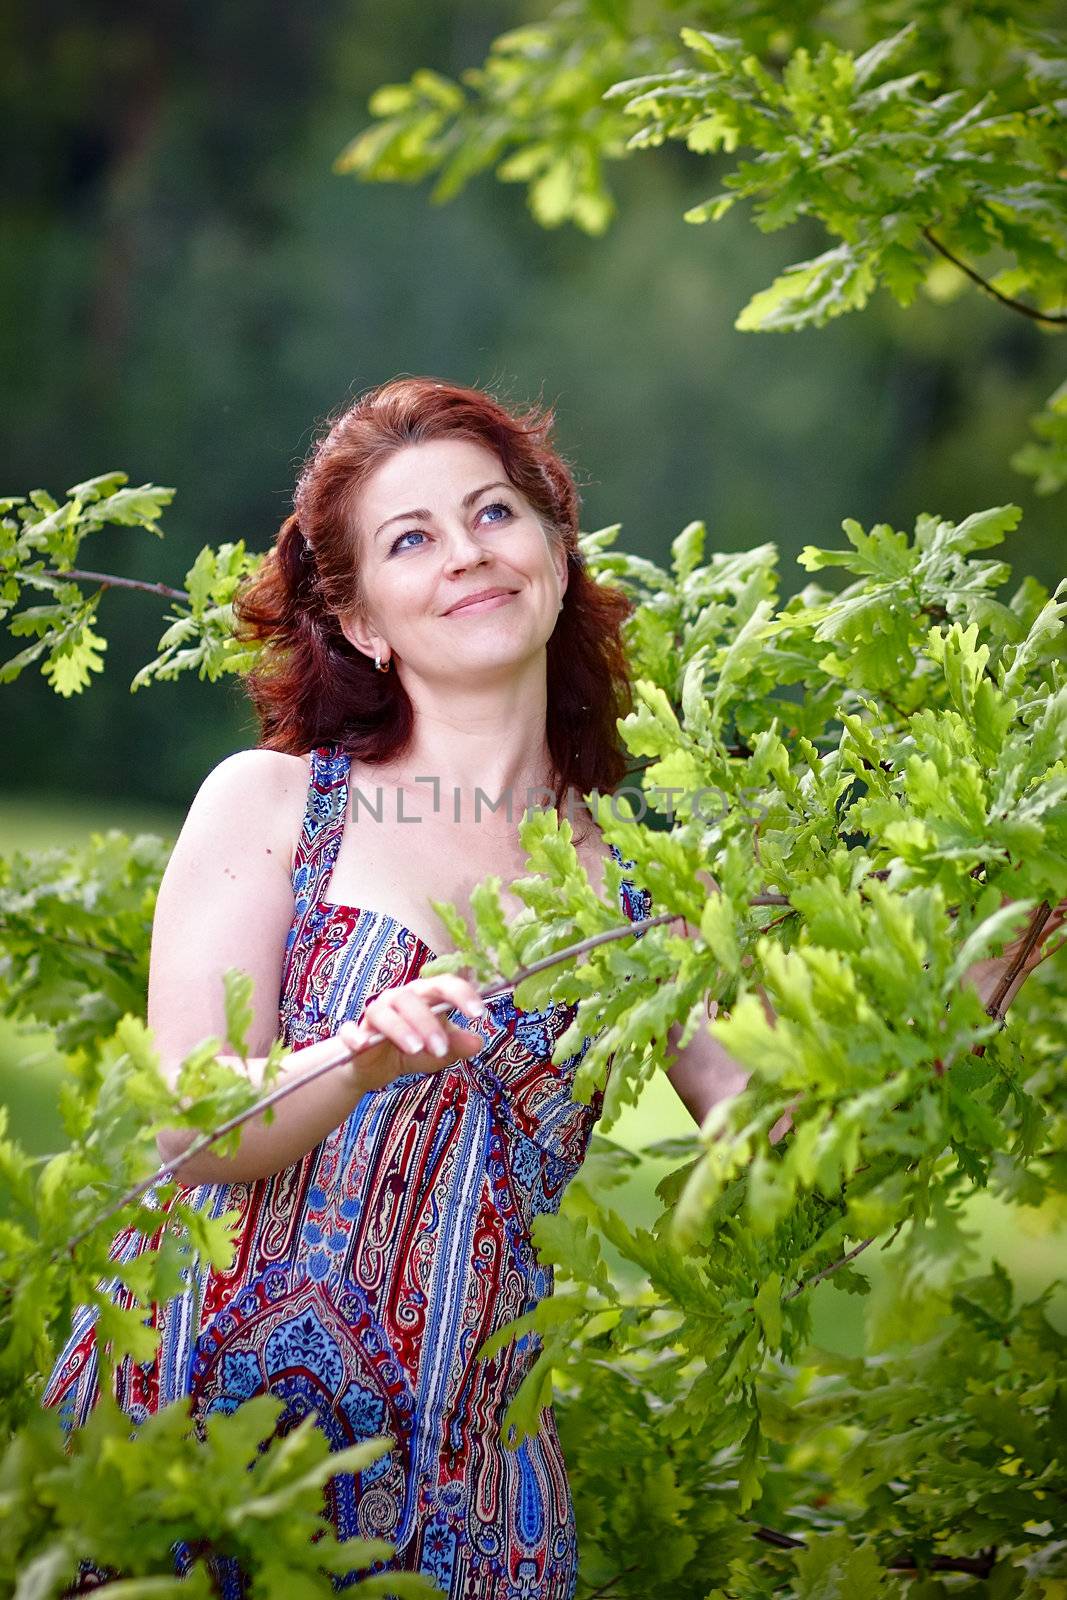 The beautiful woman with oak branches